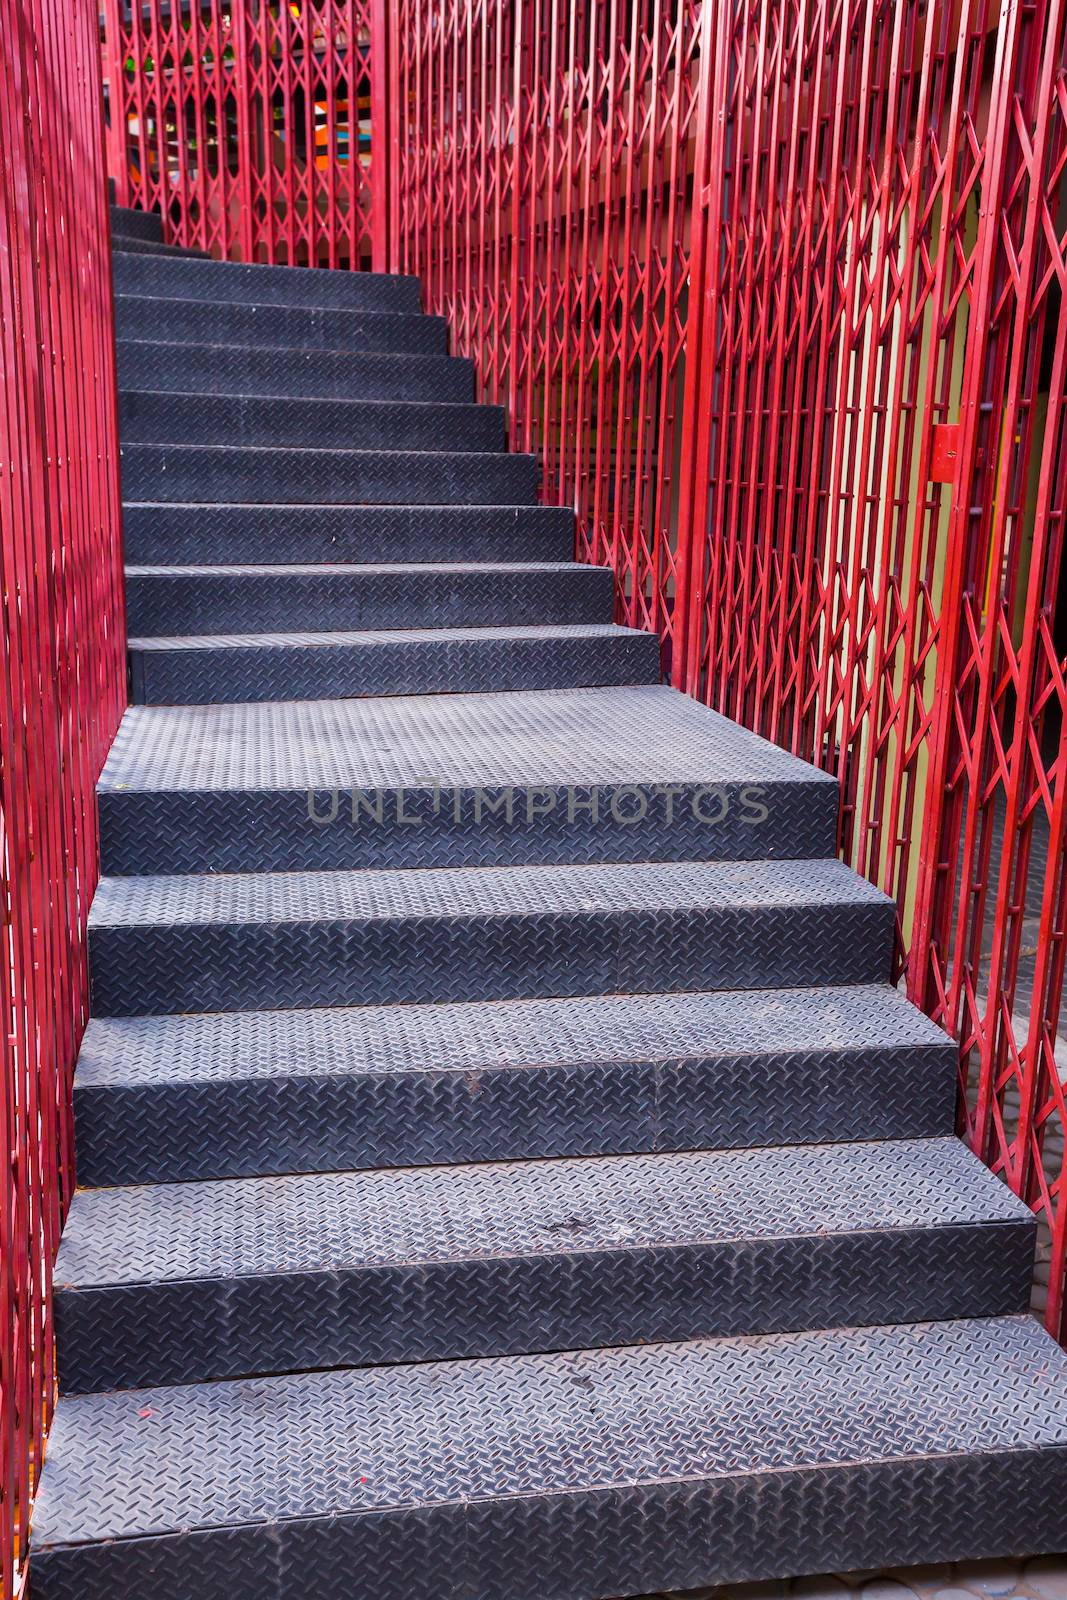 Black staircase and red fence by smuay